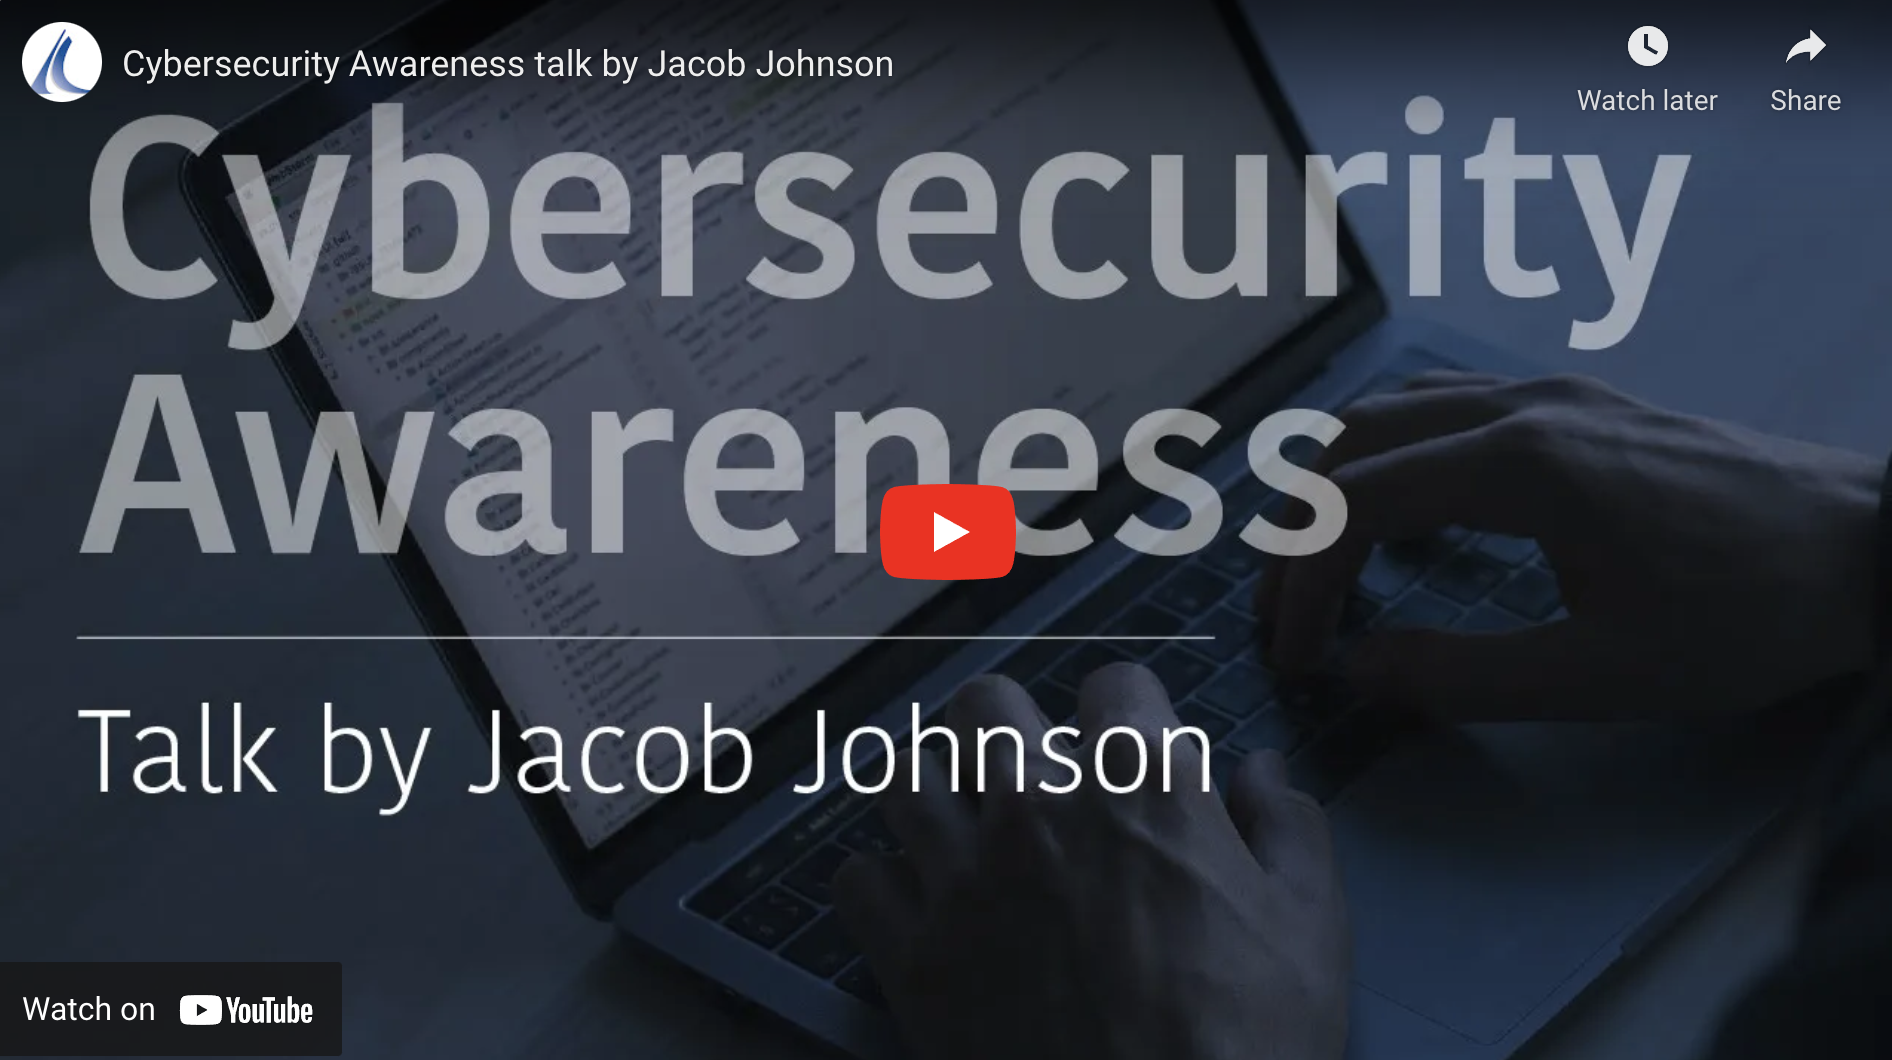 Cybersecurity Awareness talk by Jacob Johnson